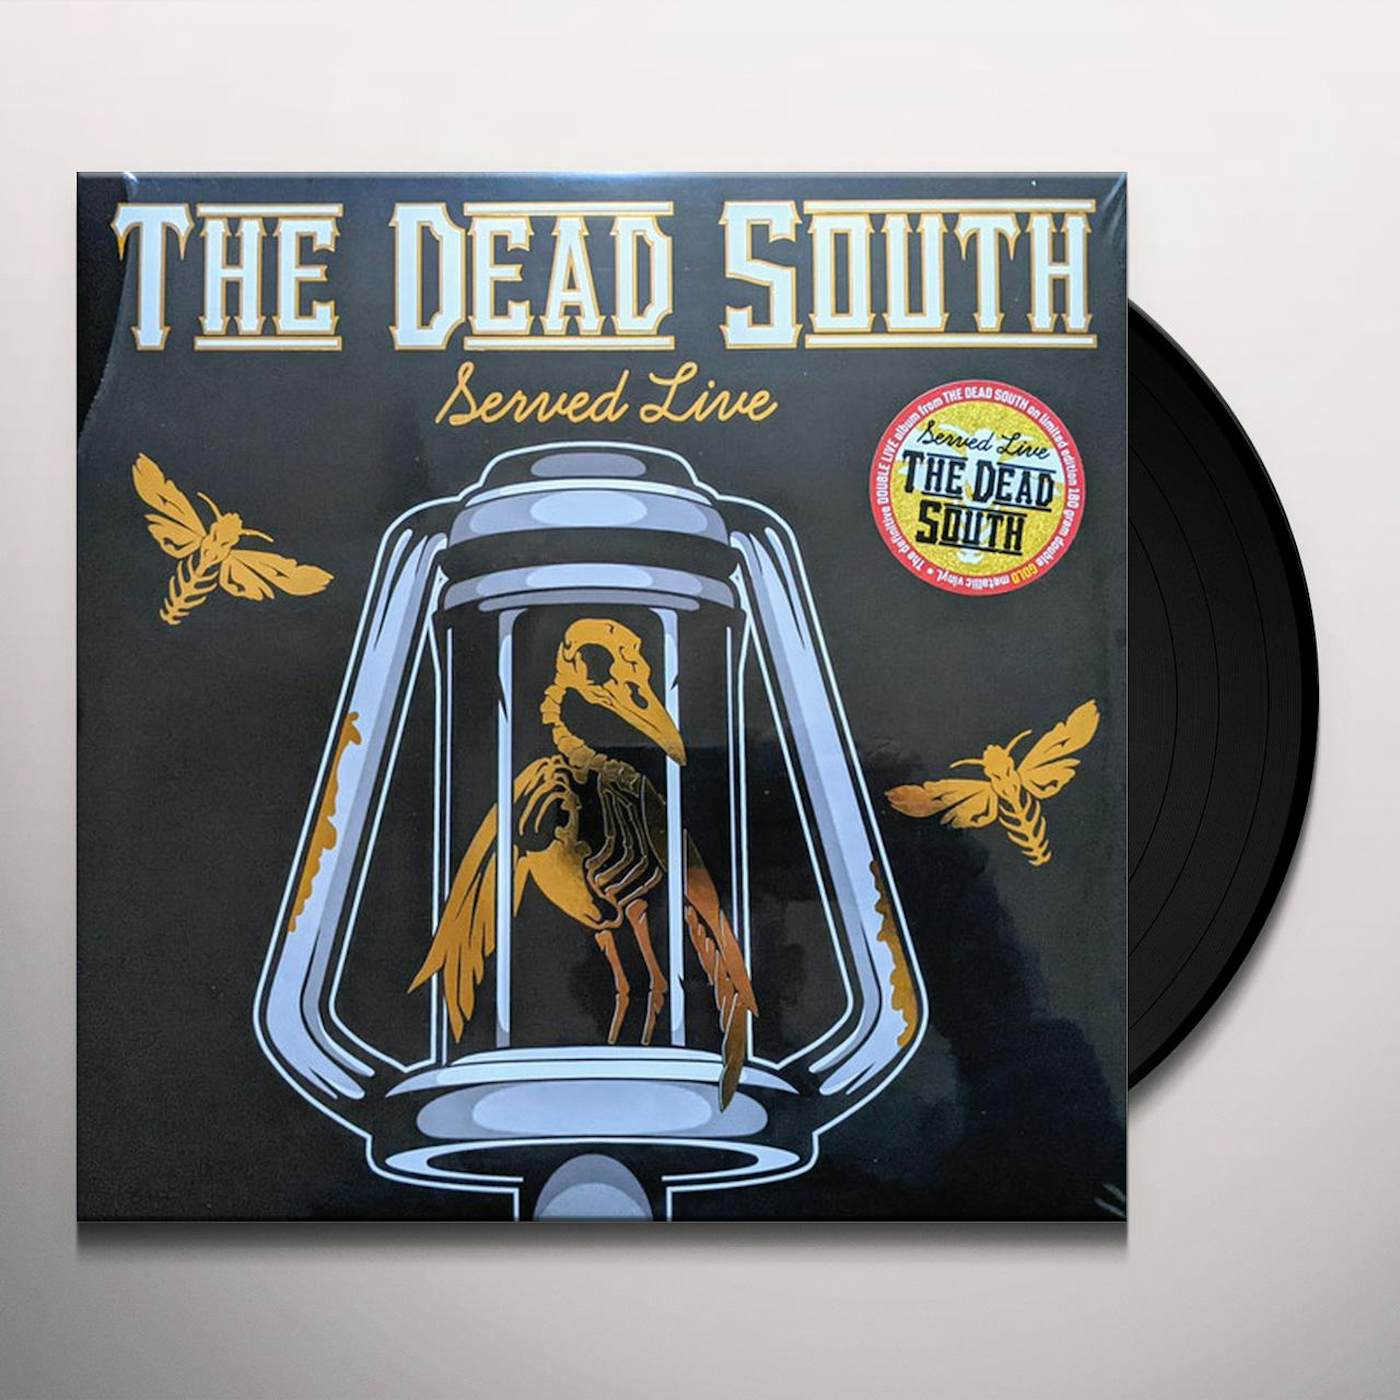 The Dead South Served Live Vinyl Record